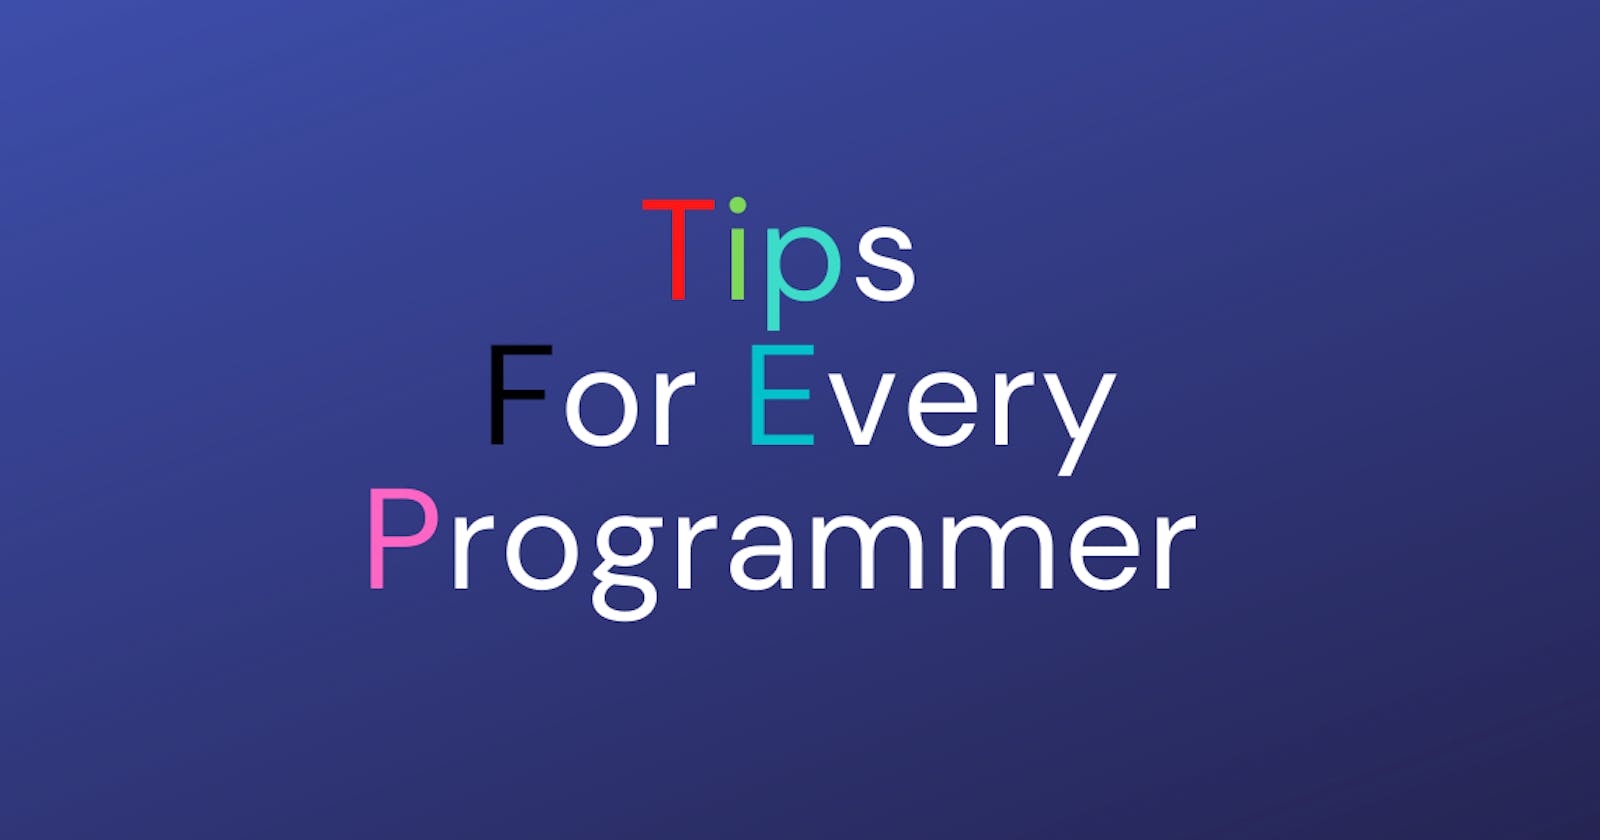 Tips for every Programmer